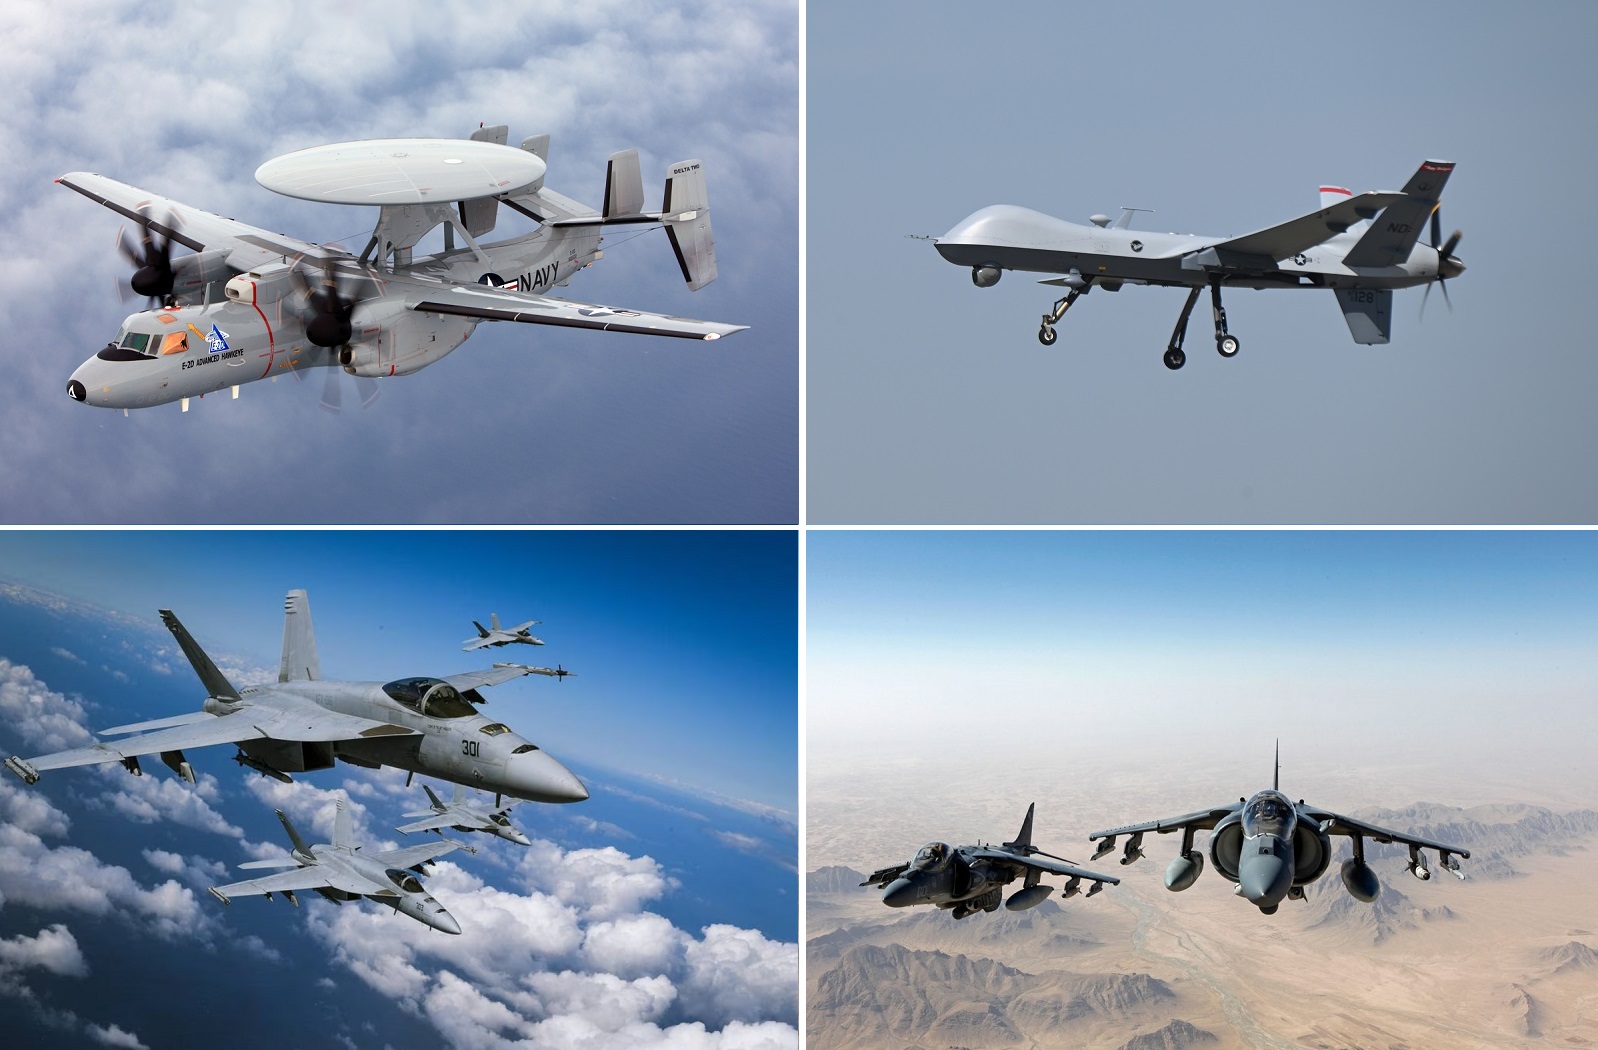 MQ-9 Reaper transmitted target coordinates to F/A-18 Hornet fighters and AV-8B Harrier attack aircraft on the other side of the world